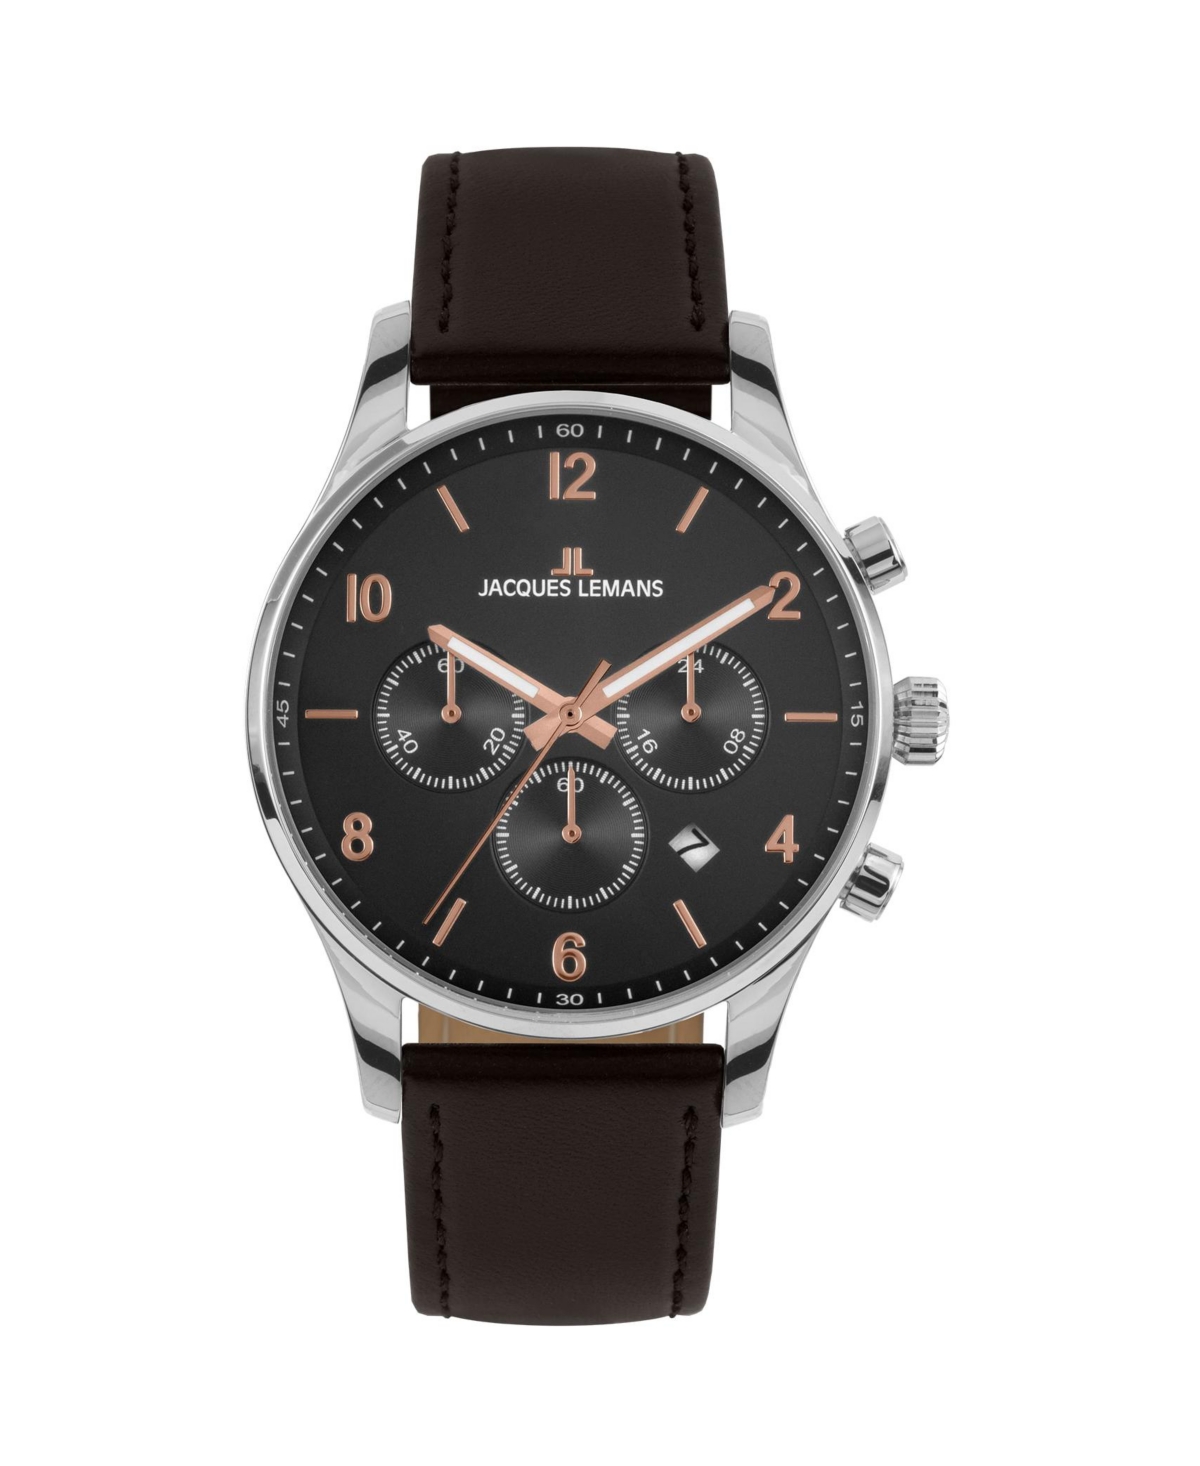 Men's London Watch with Leather Strap, Solid Stainless Steel, Chronograph, 1-2126 - Black